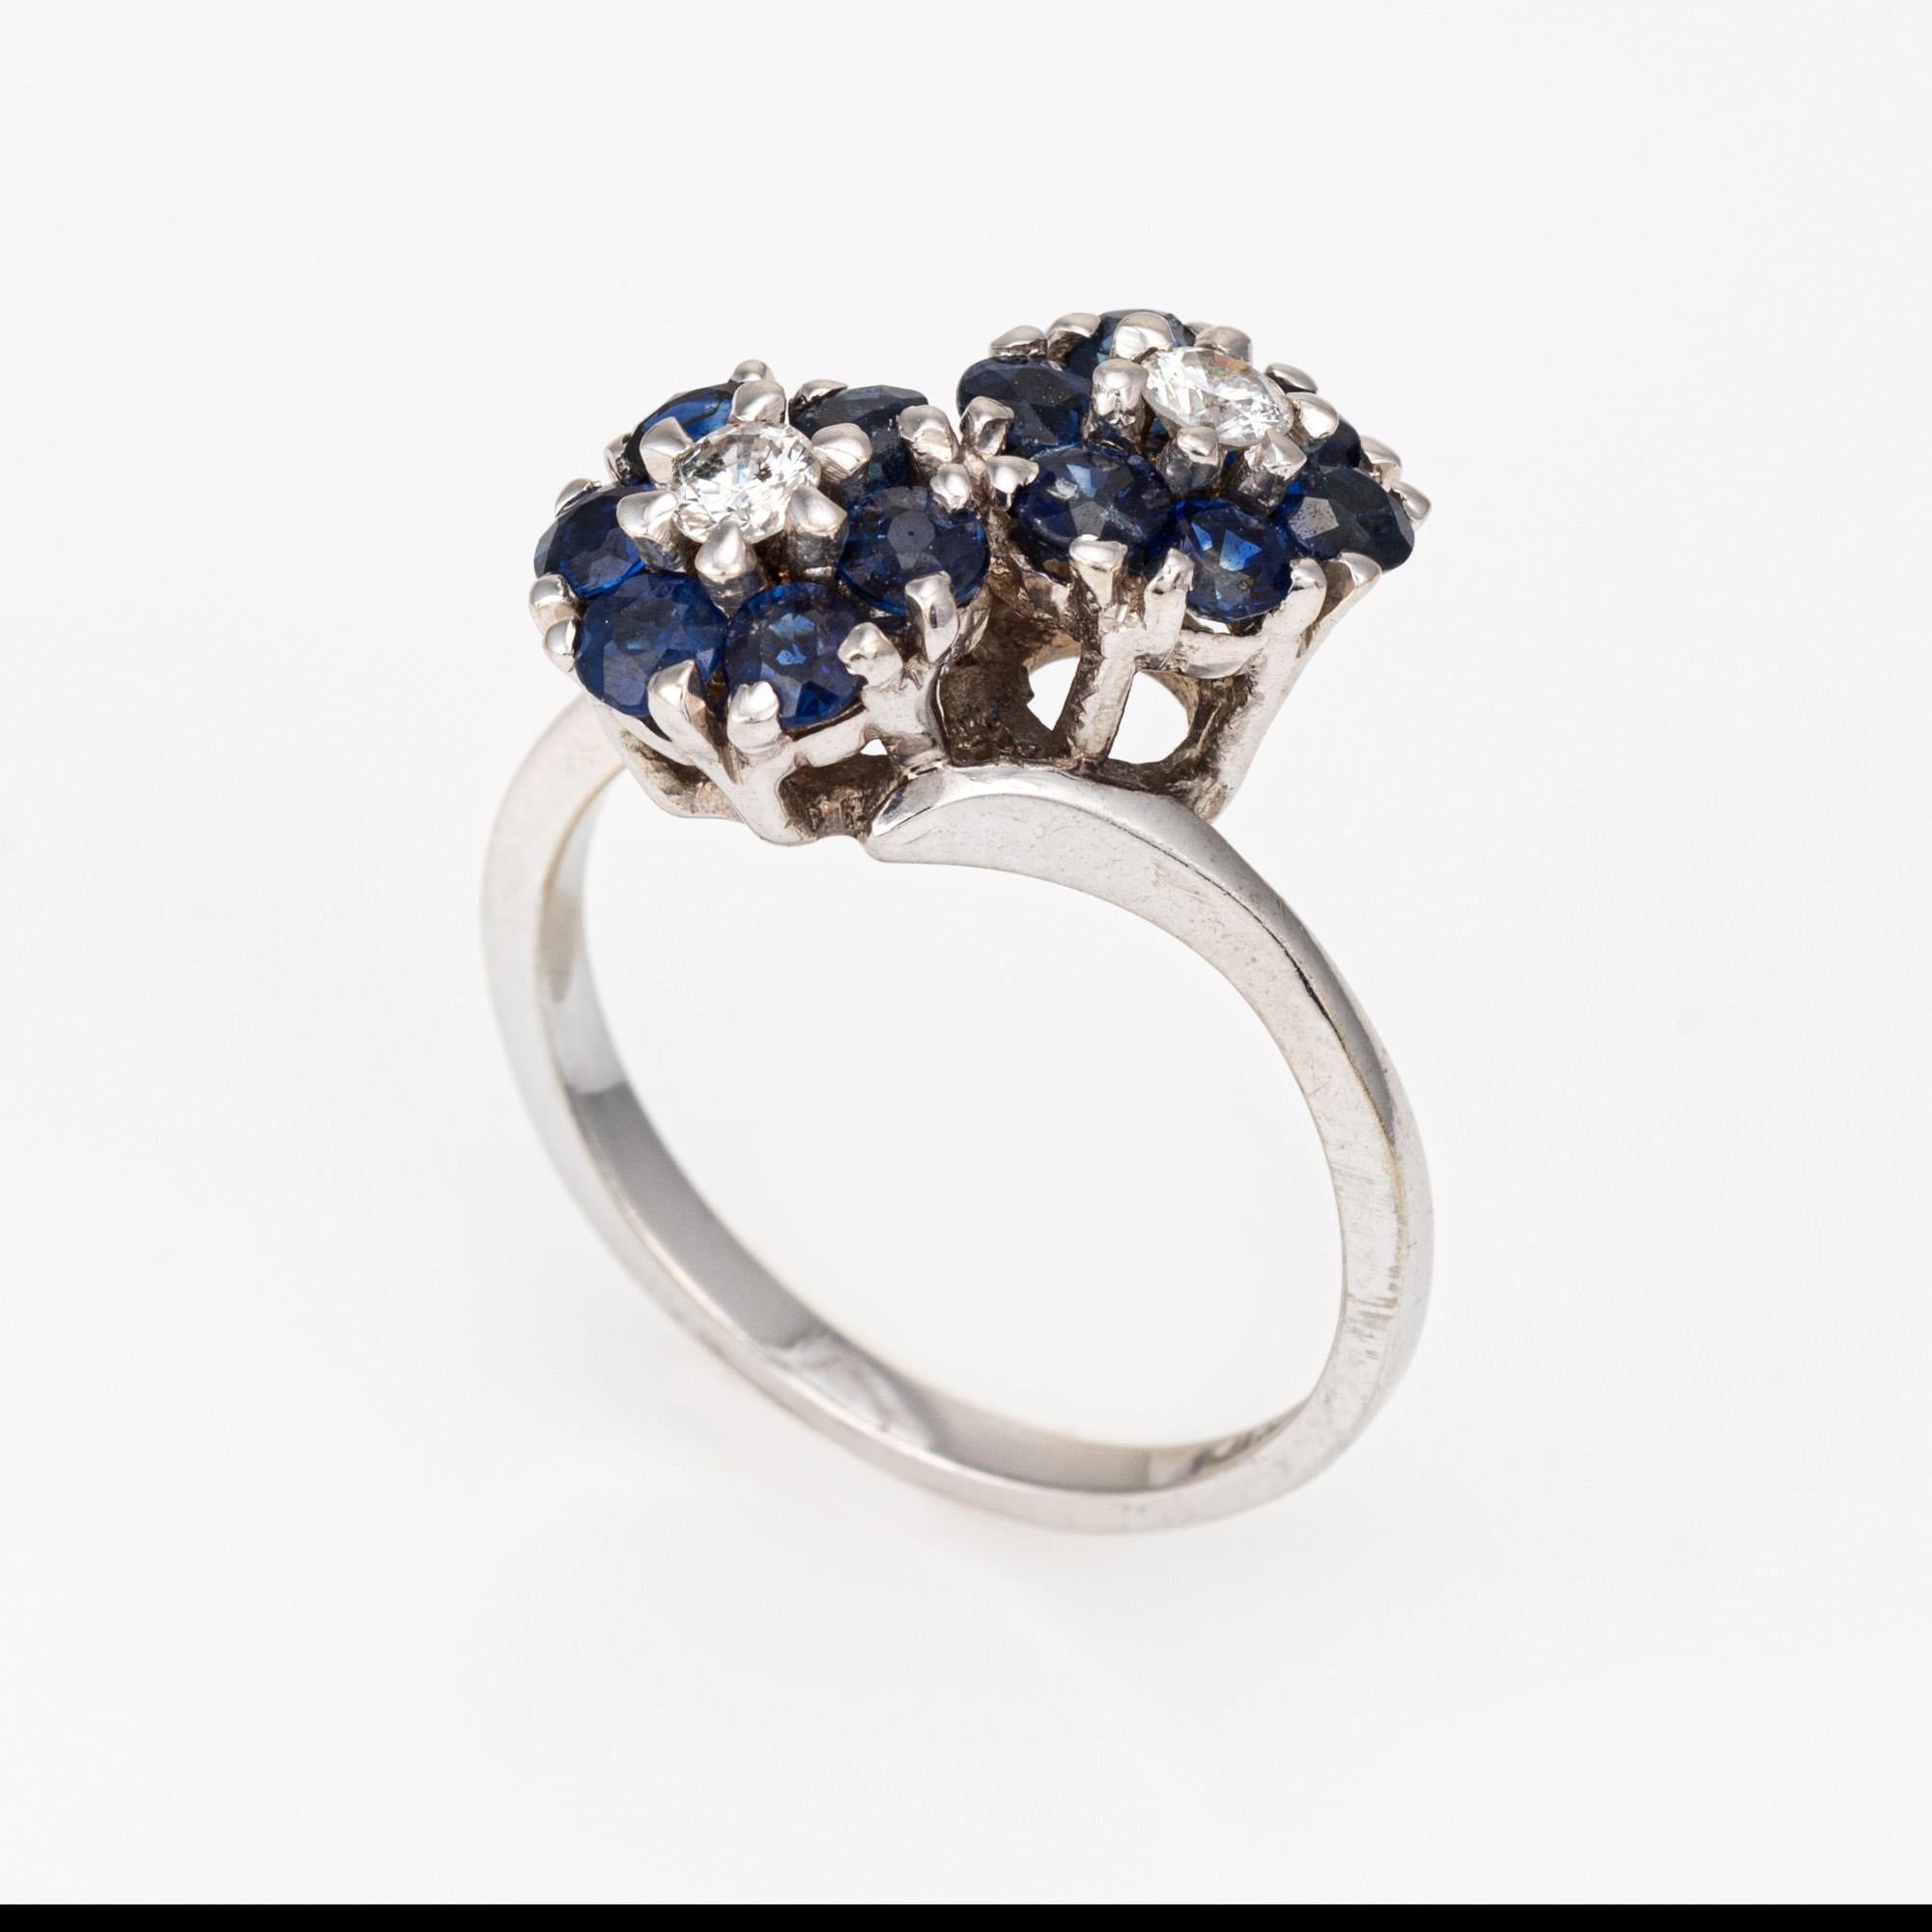 Finely detailed vintage sapphire & diamond 'moi et toi' cluster ring crafted in 14k white gold (circa 1960s to 1970s). 

Two estimated 0.08 carat diamonds and 12 estimated 0.07 carat blue sapphires are set into the mounts. The total sapphire weight